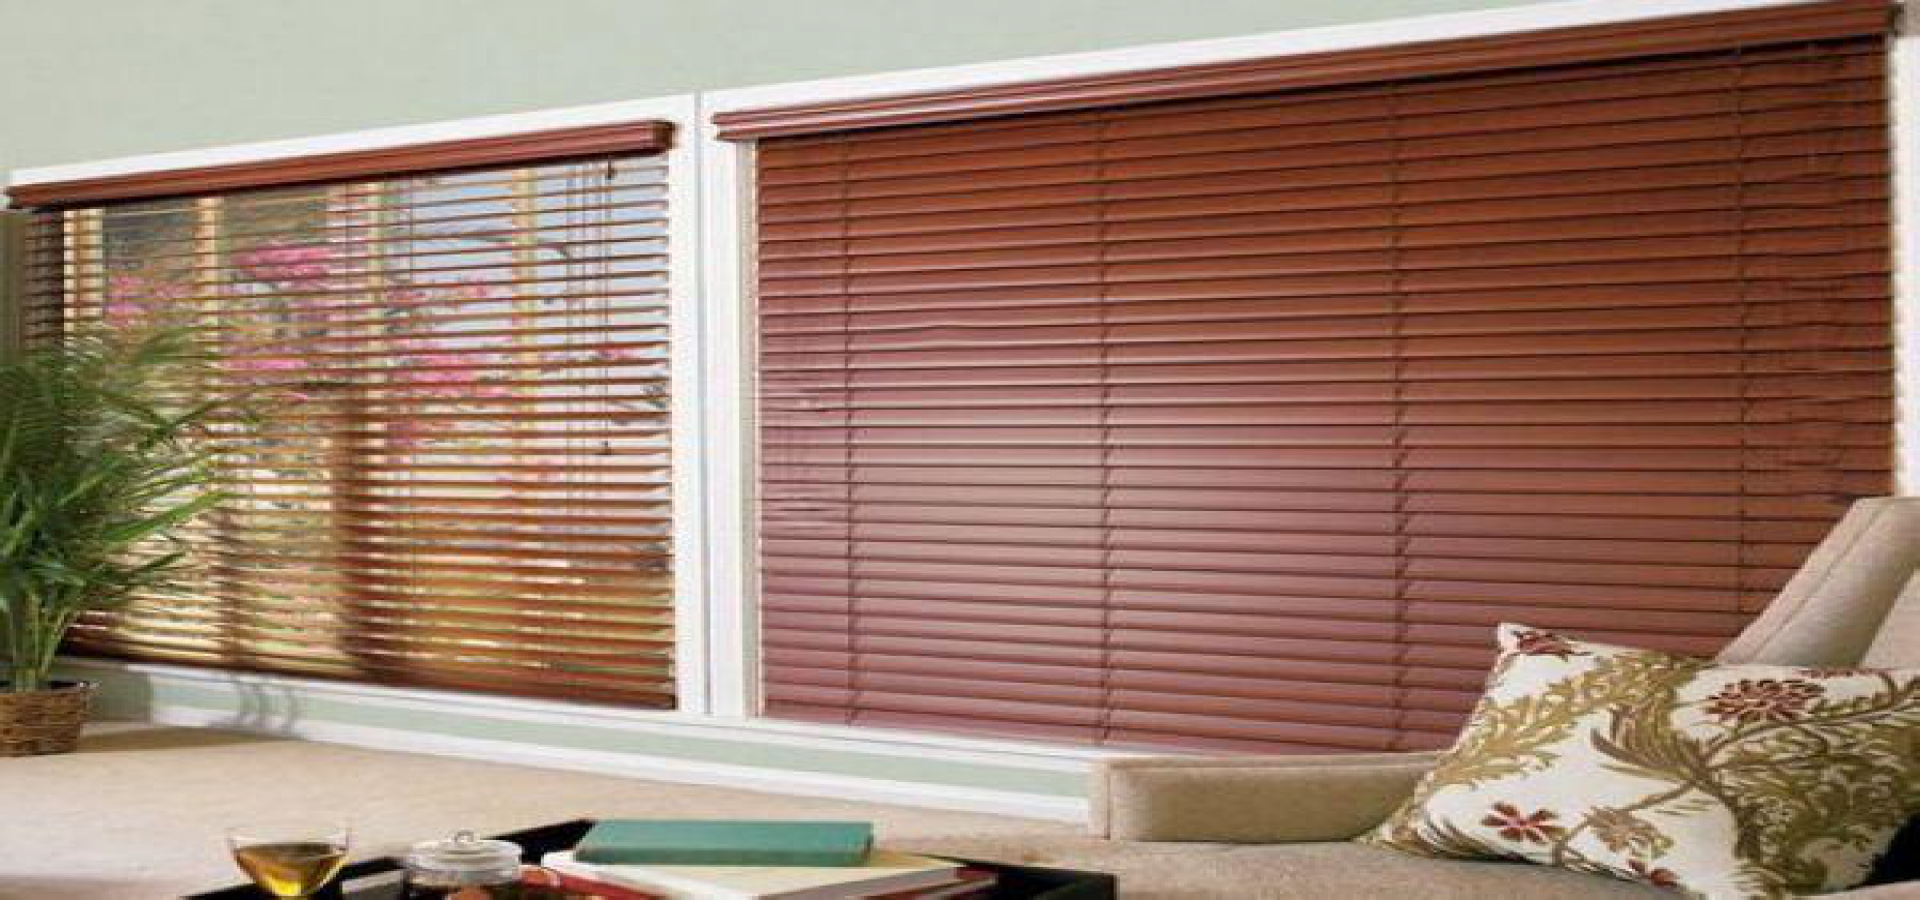 See Your Room In A New Light With Our Stylish Blinds